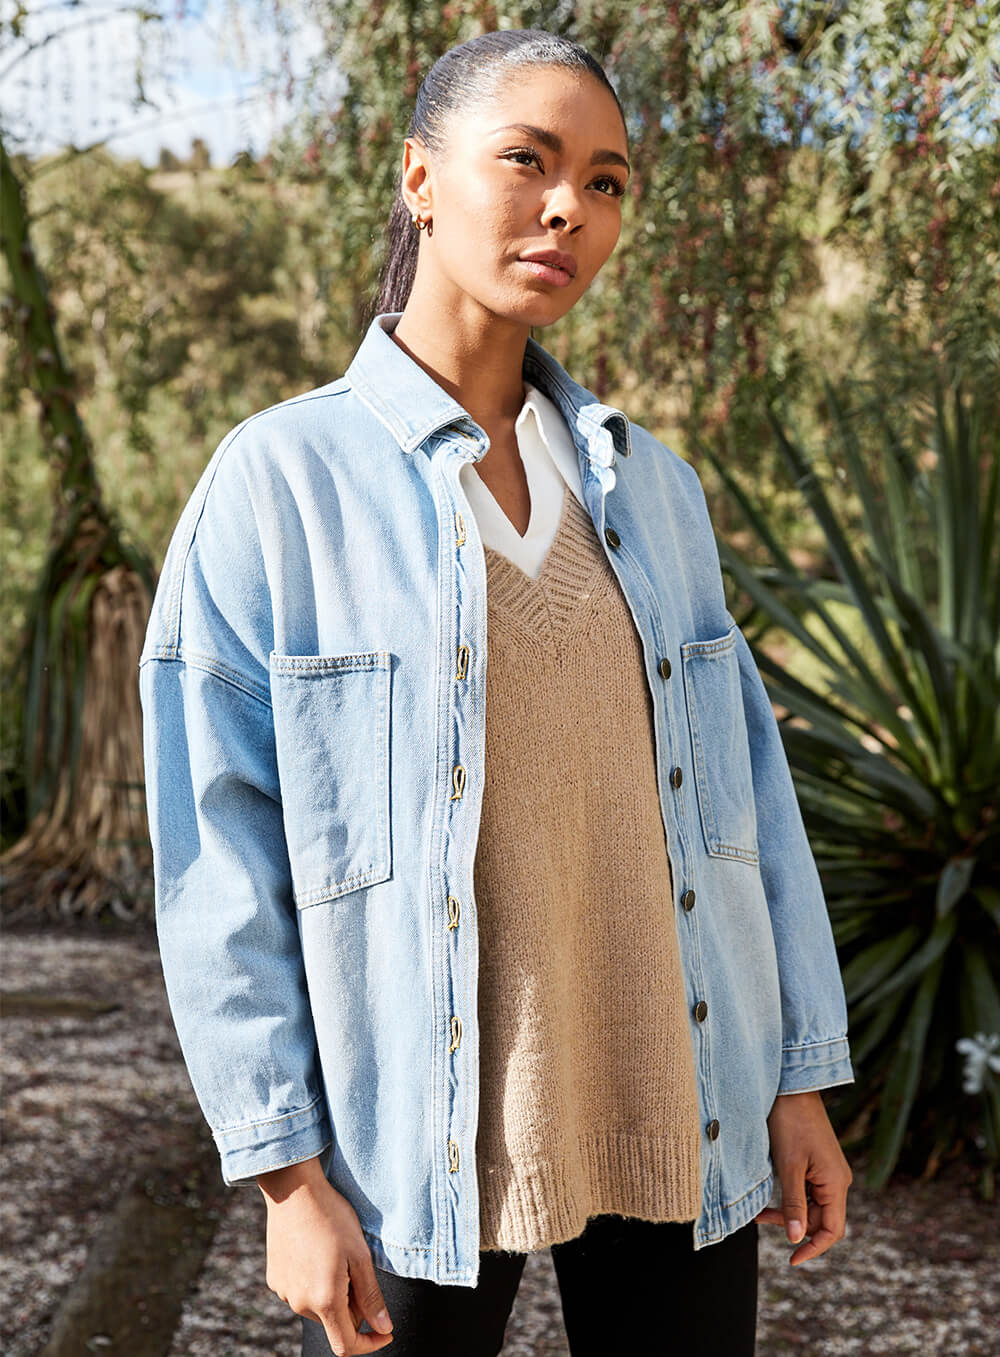 The Wake Up Denim Jacket in blue features full button through front, collar at the neck line, 2 large chest pockets, 2 side pockets, functional button down cuff adn scoop hem.